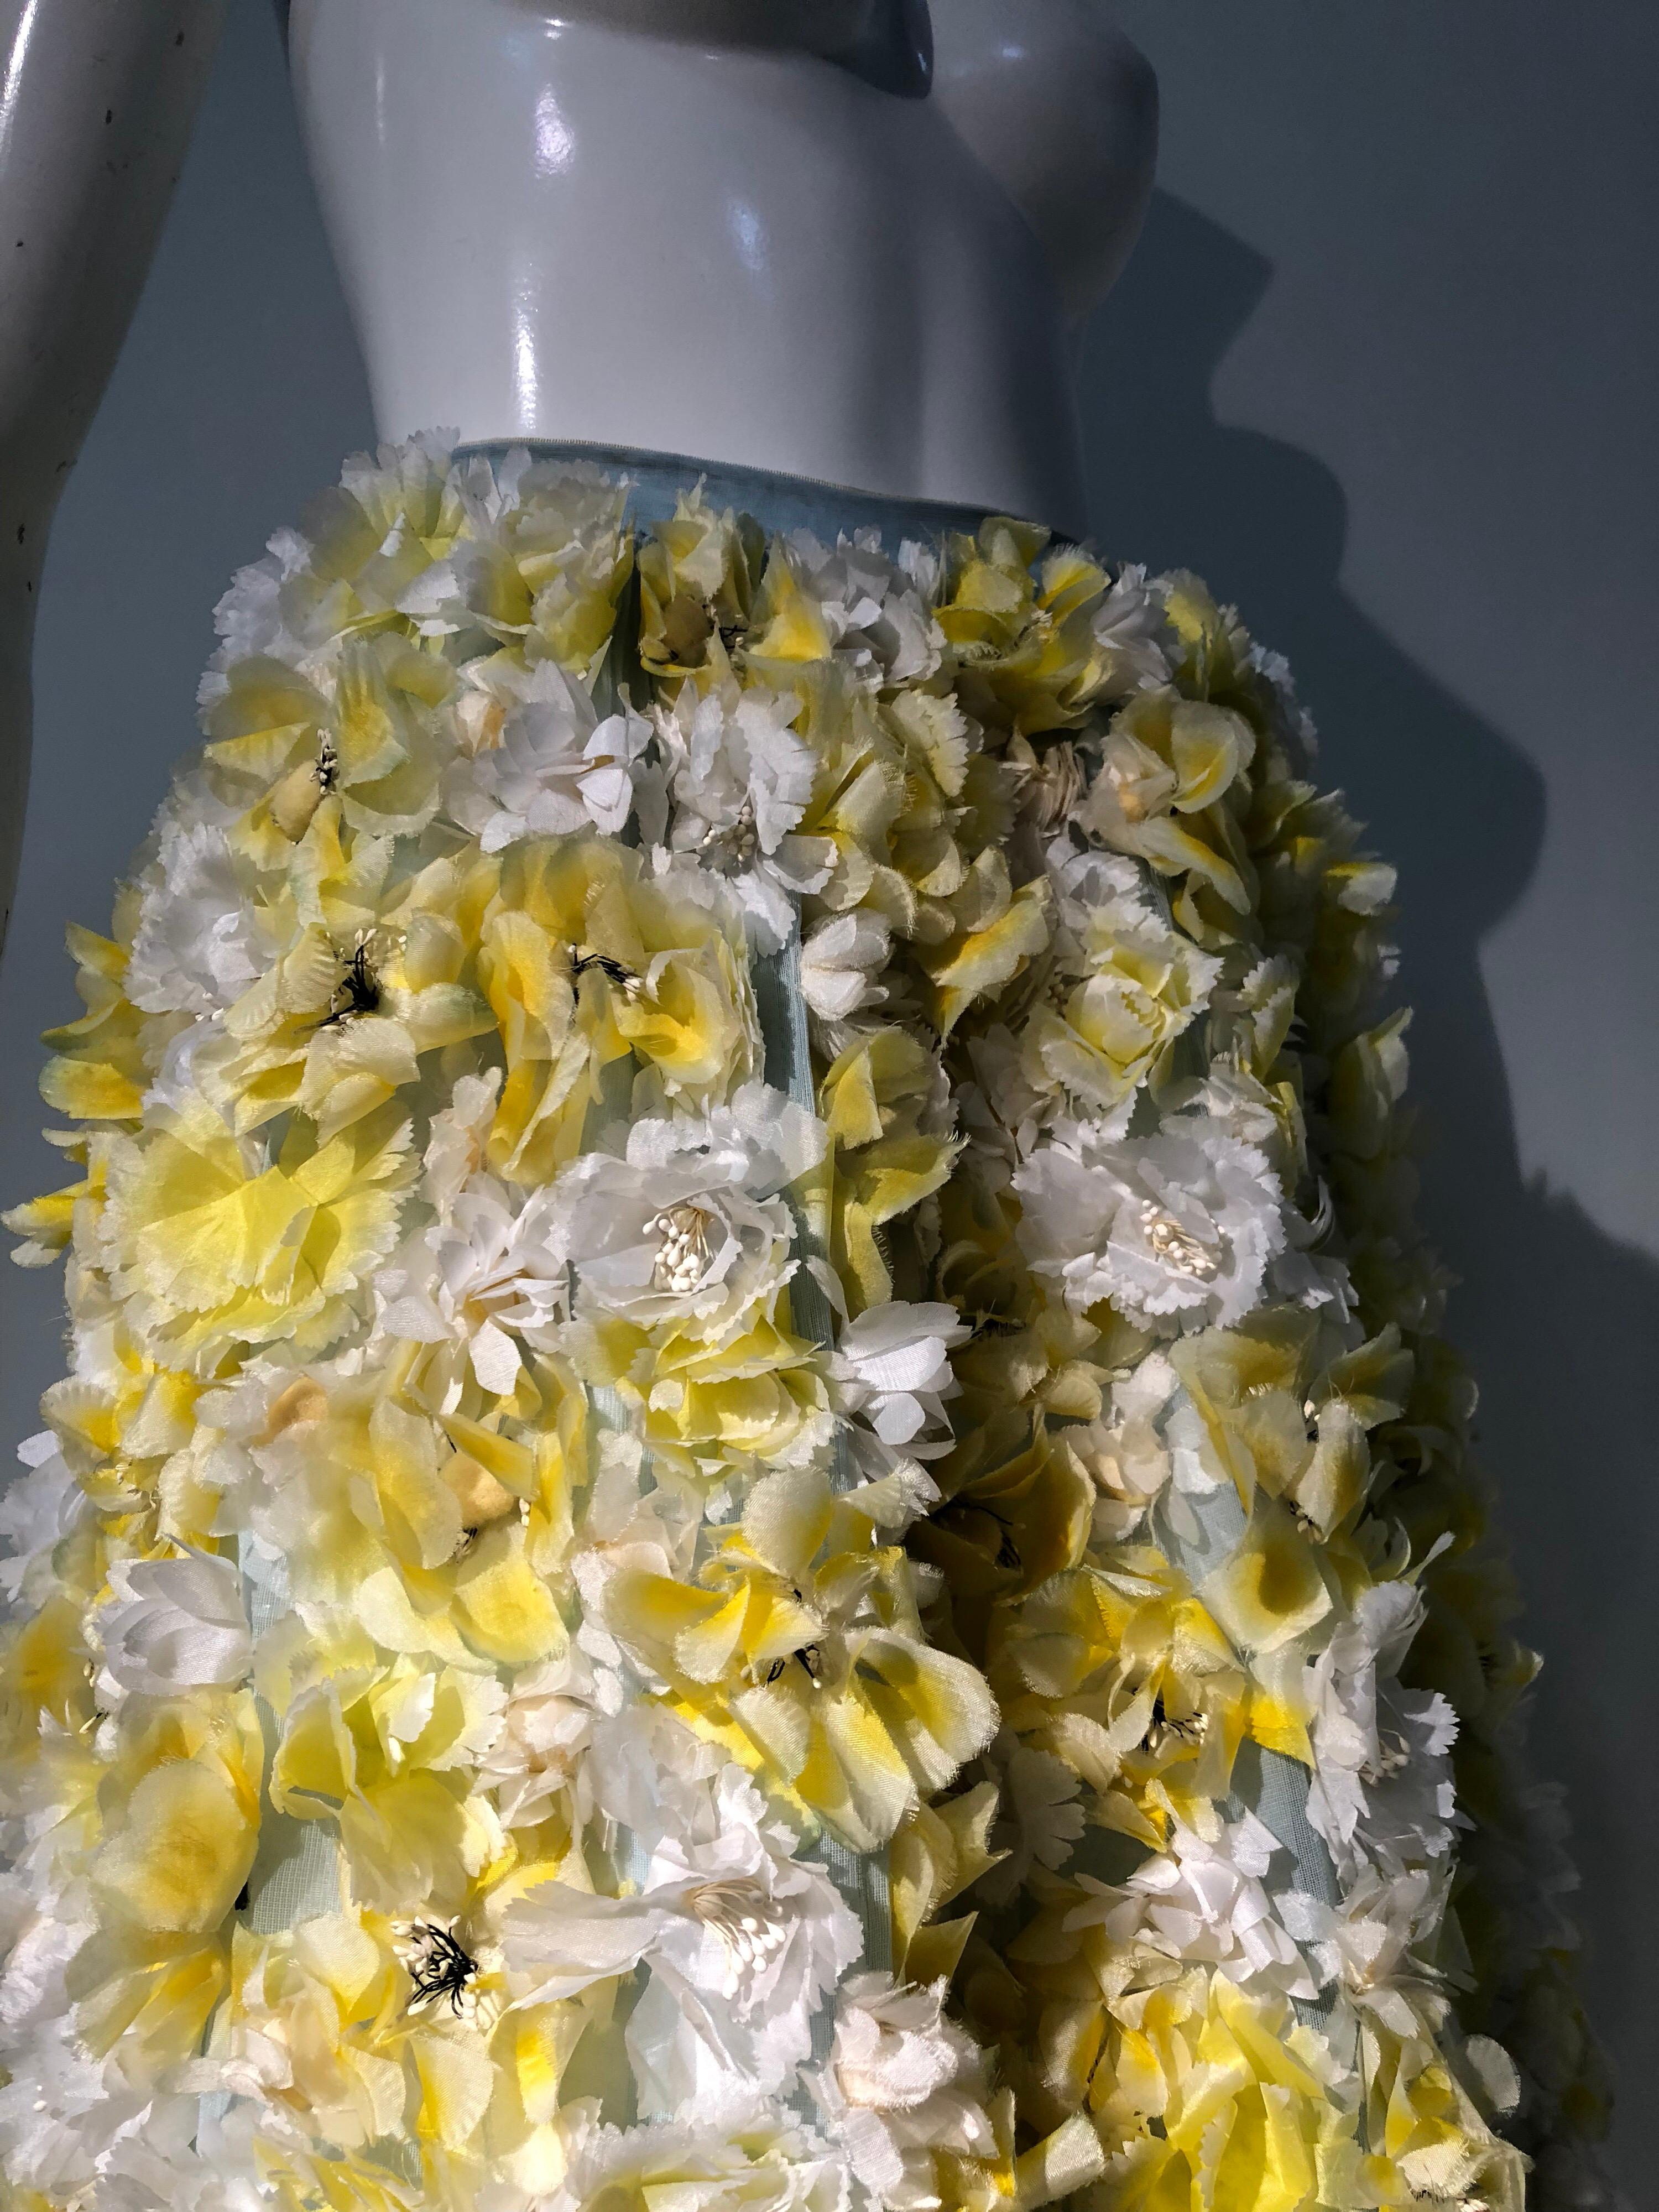 Brown 1960s Adolpho Floral Fantasy Ball Skirt In Yellow & White Silk Flowers